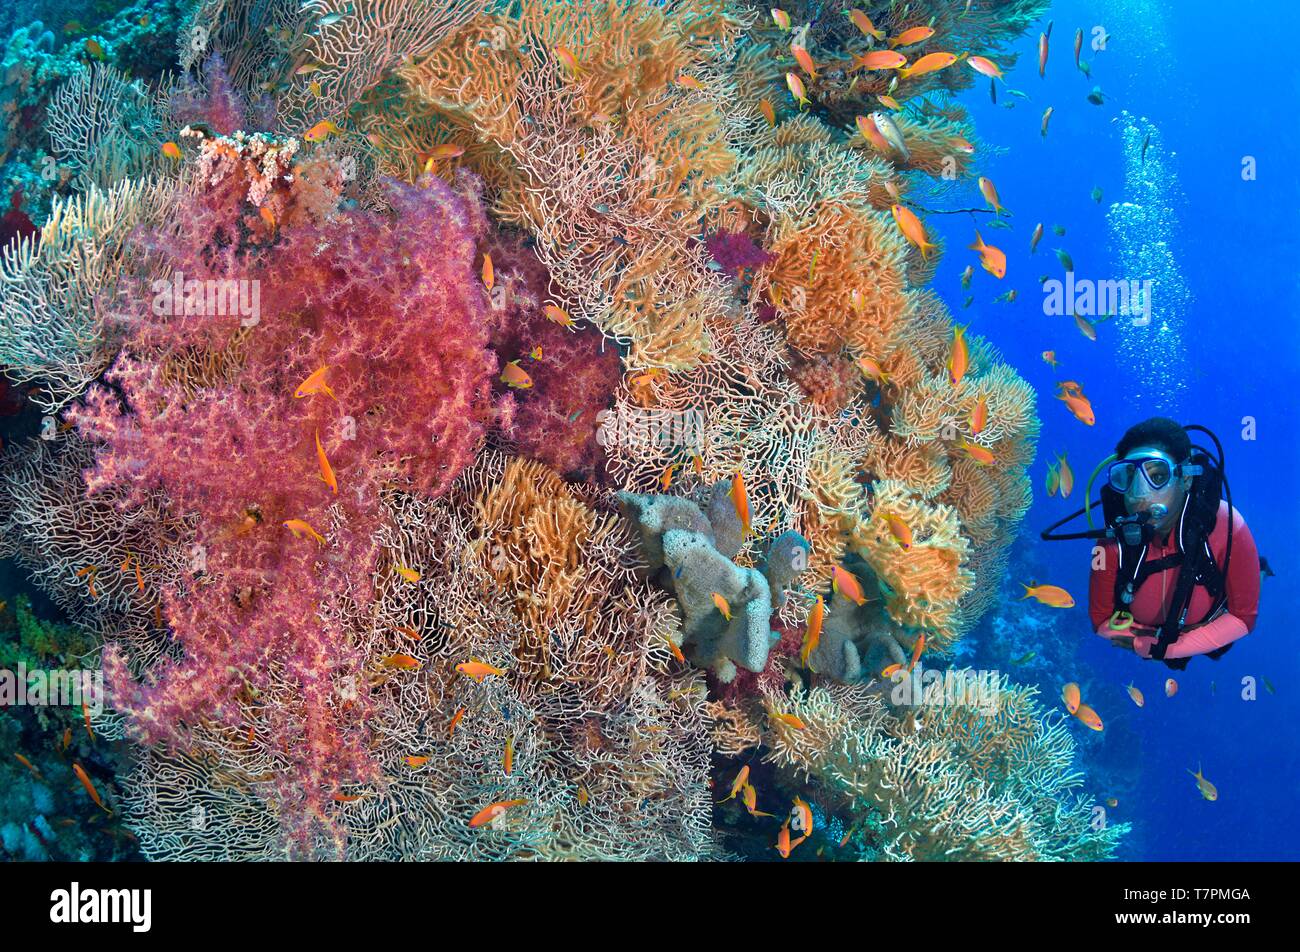 Egypt, Red Sea, a coral reef with red alcyonarians (Dendronephthya sp.) and sea fans (Subergorgia sp.) Stock Photo